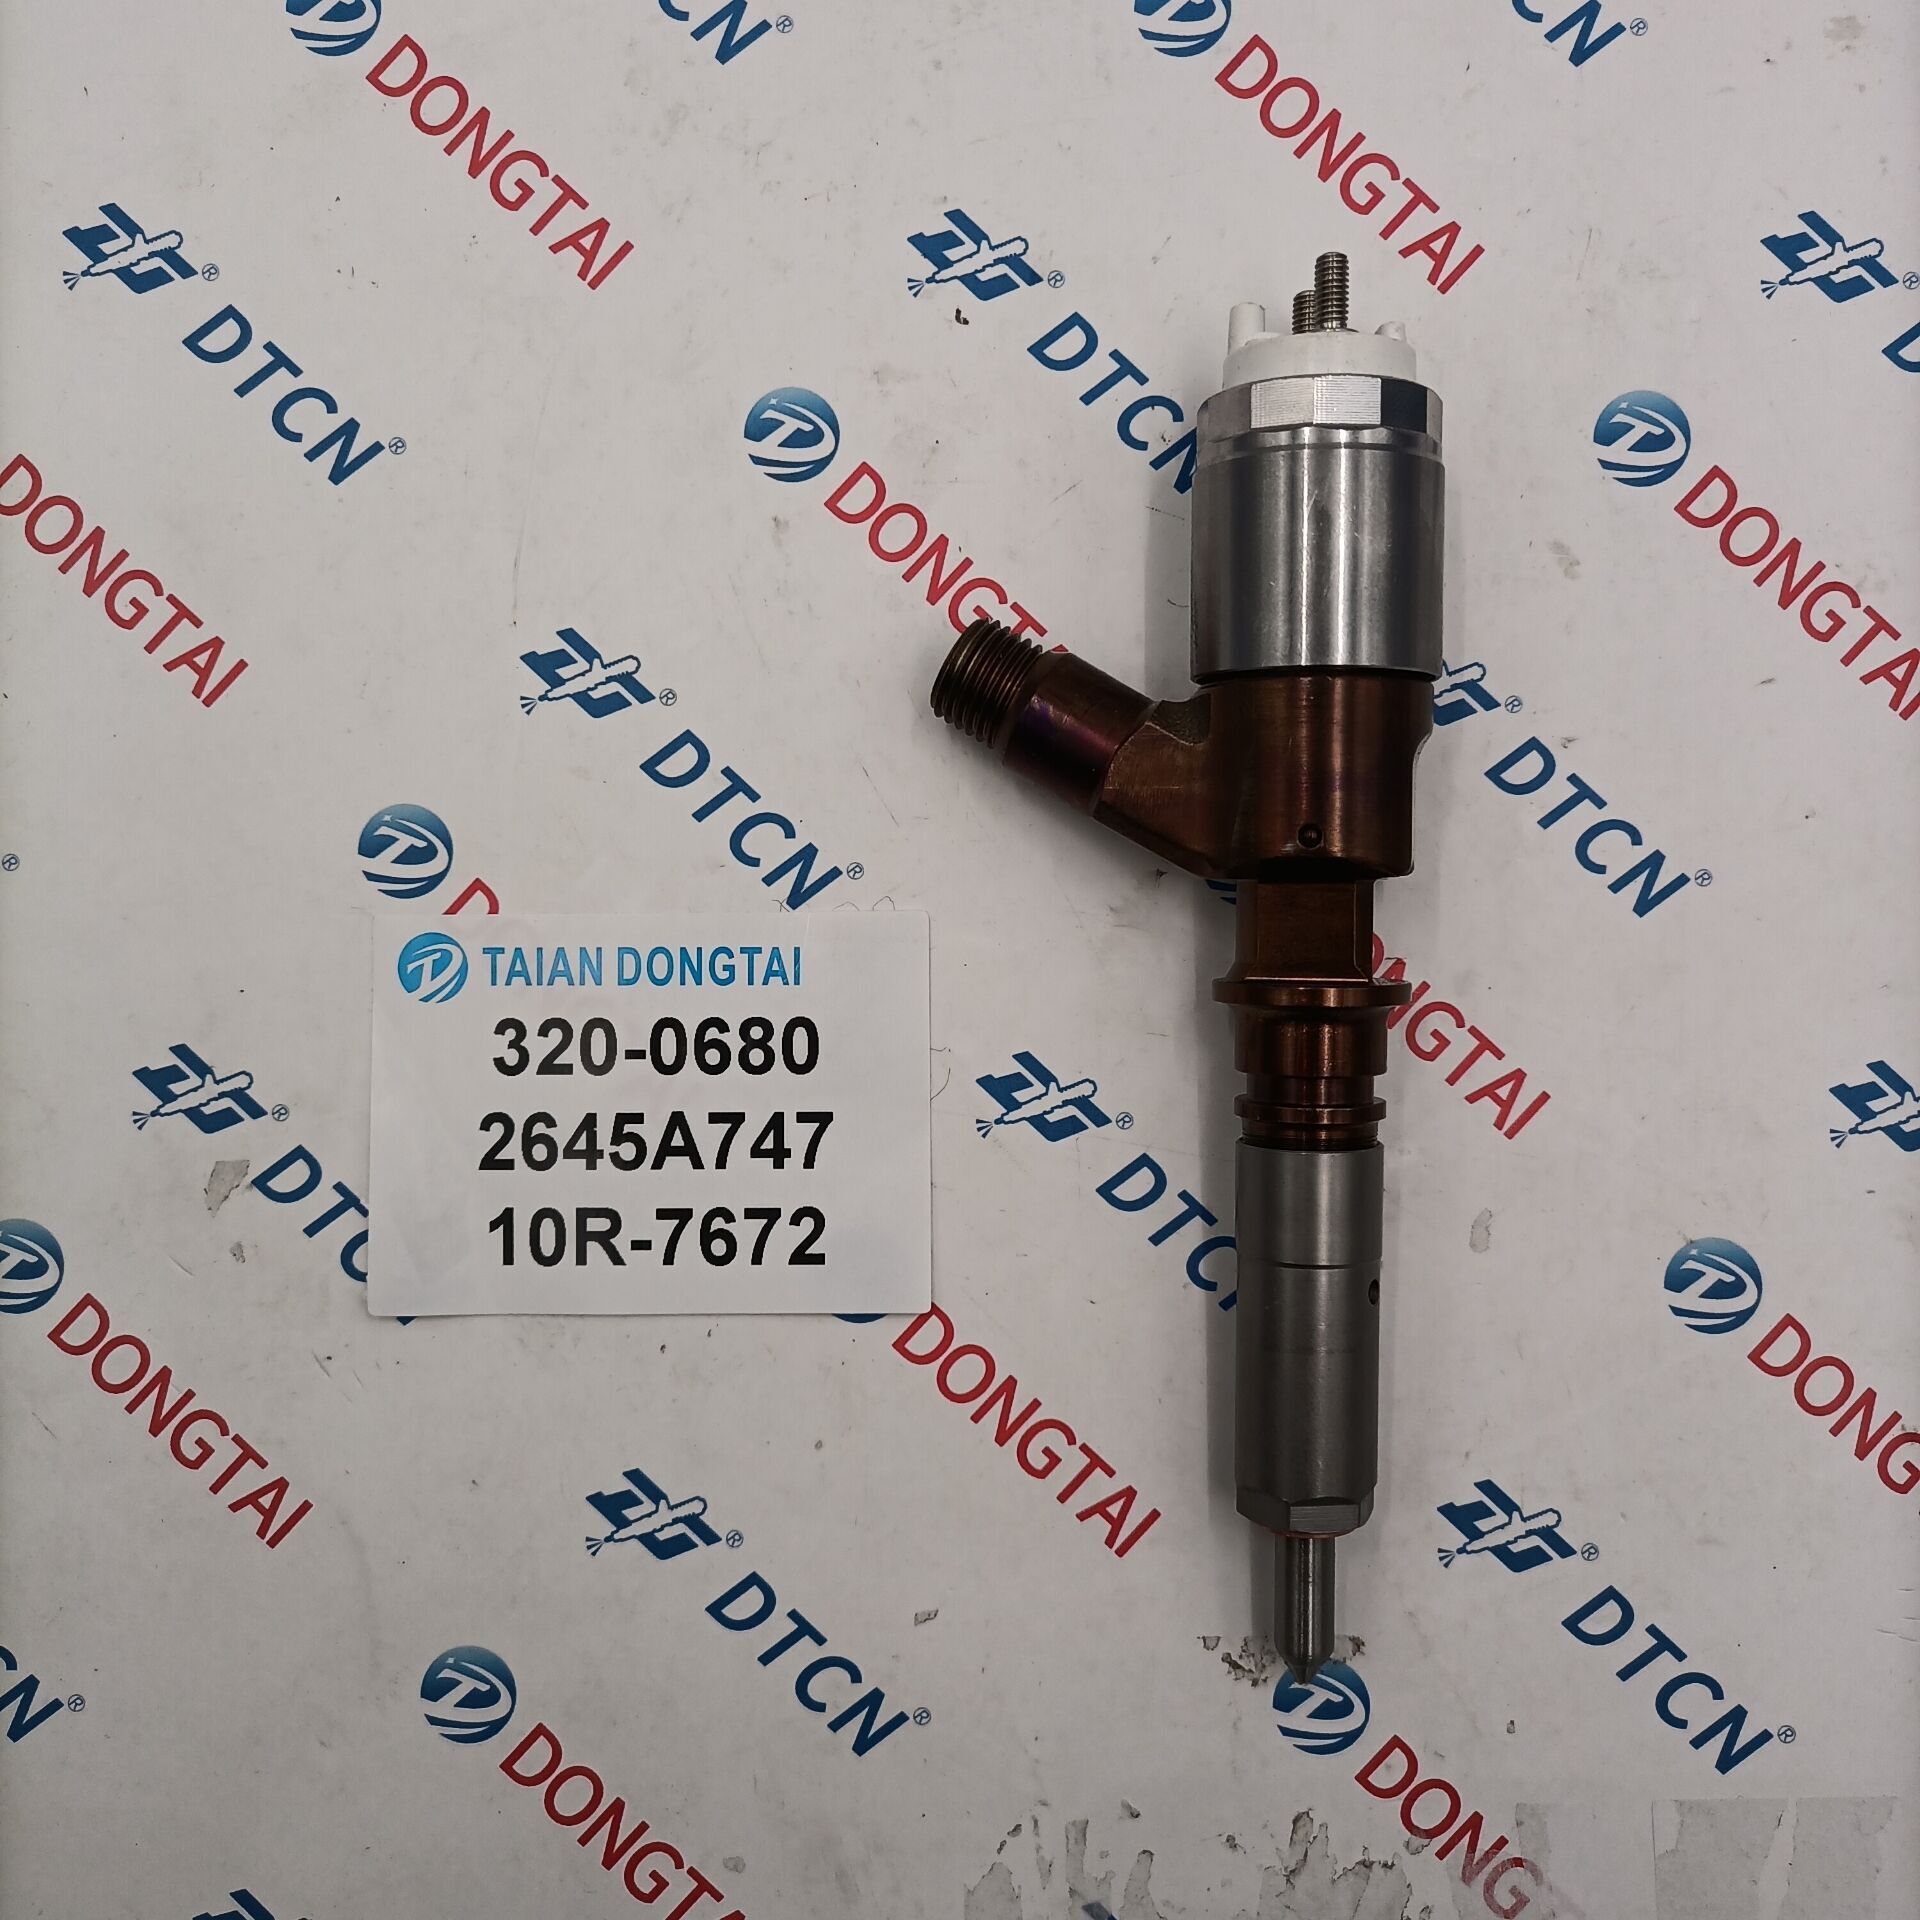 CAT INJECTOR 320-0680 ,2645A747 10R-7672 323D  FOR CAT C6.6 Engine Featured Image